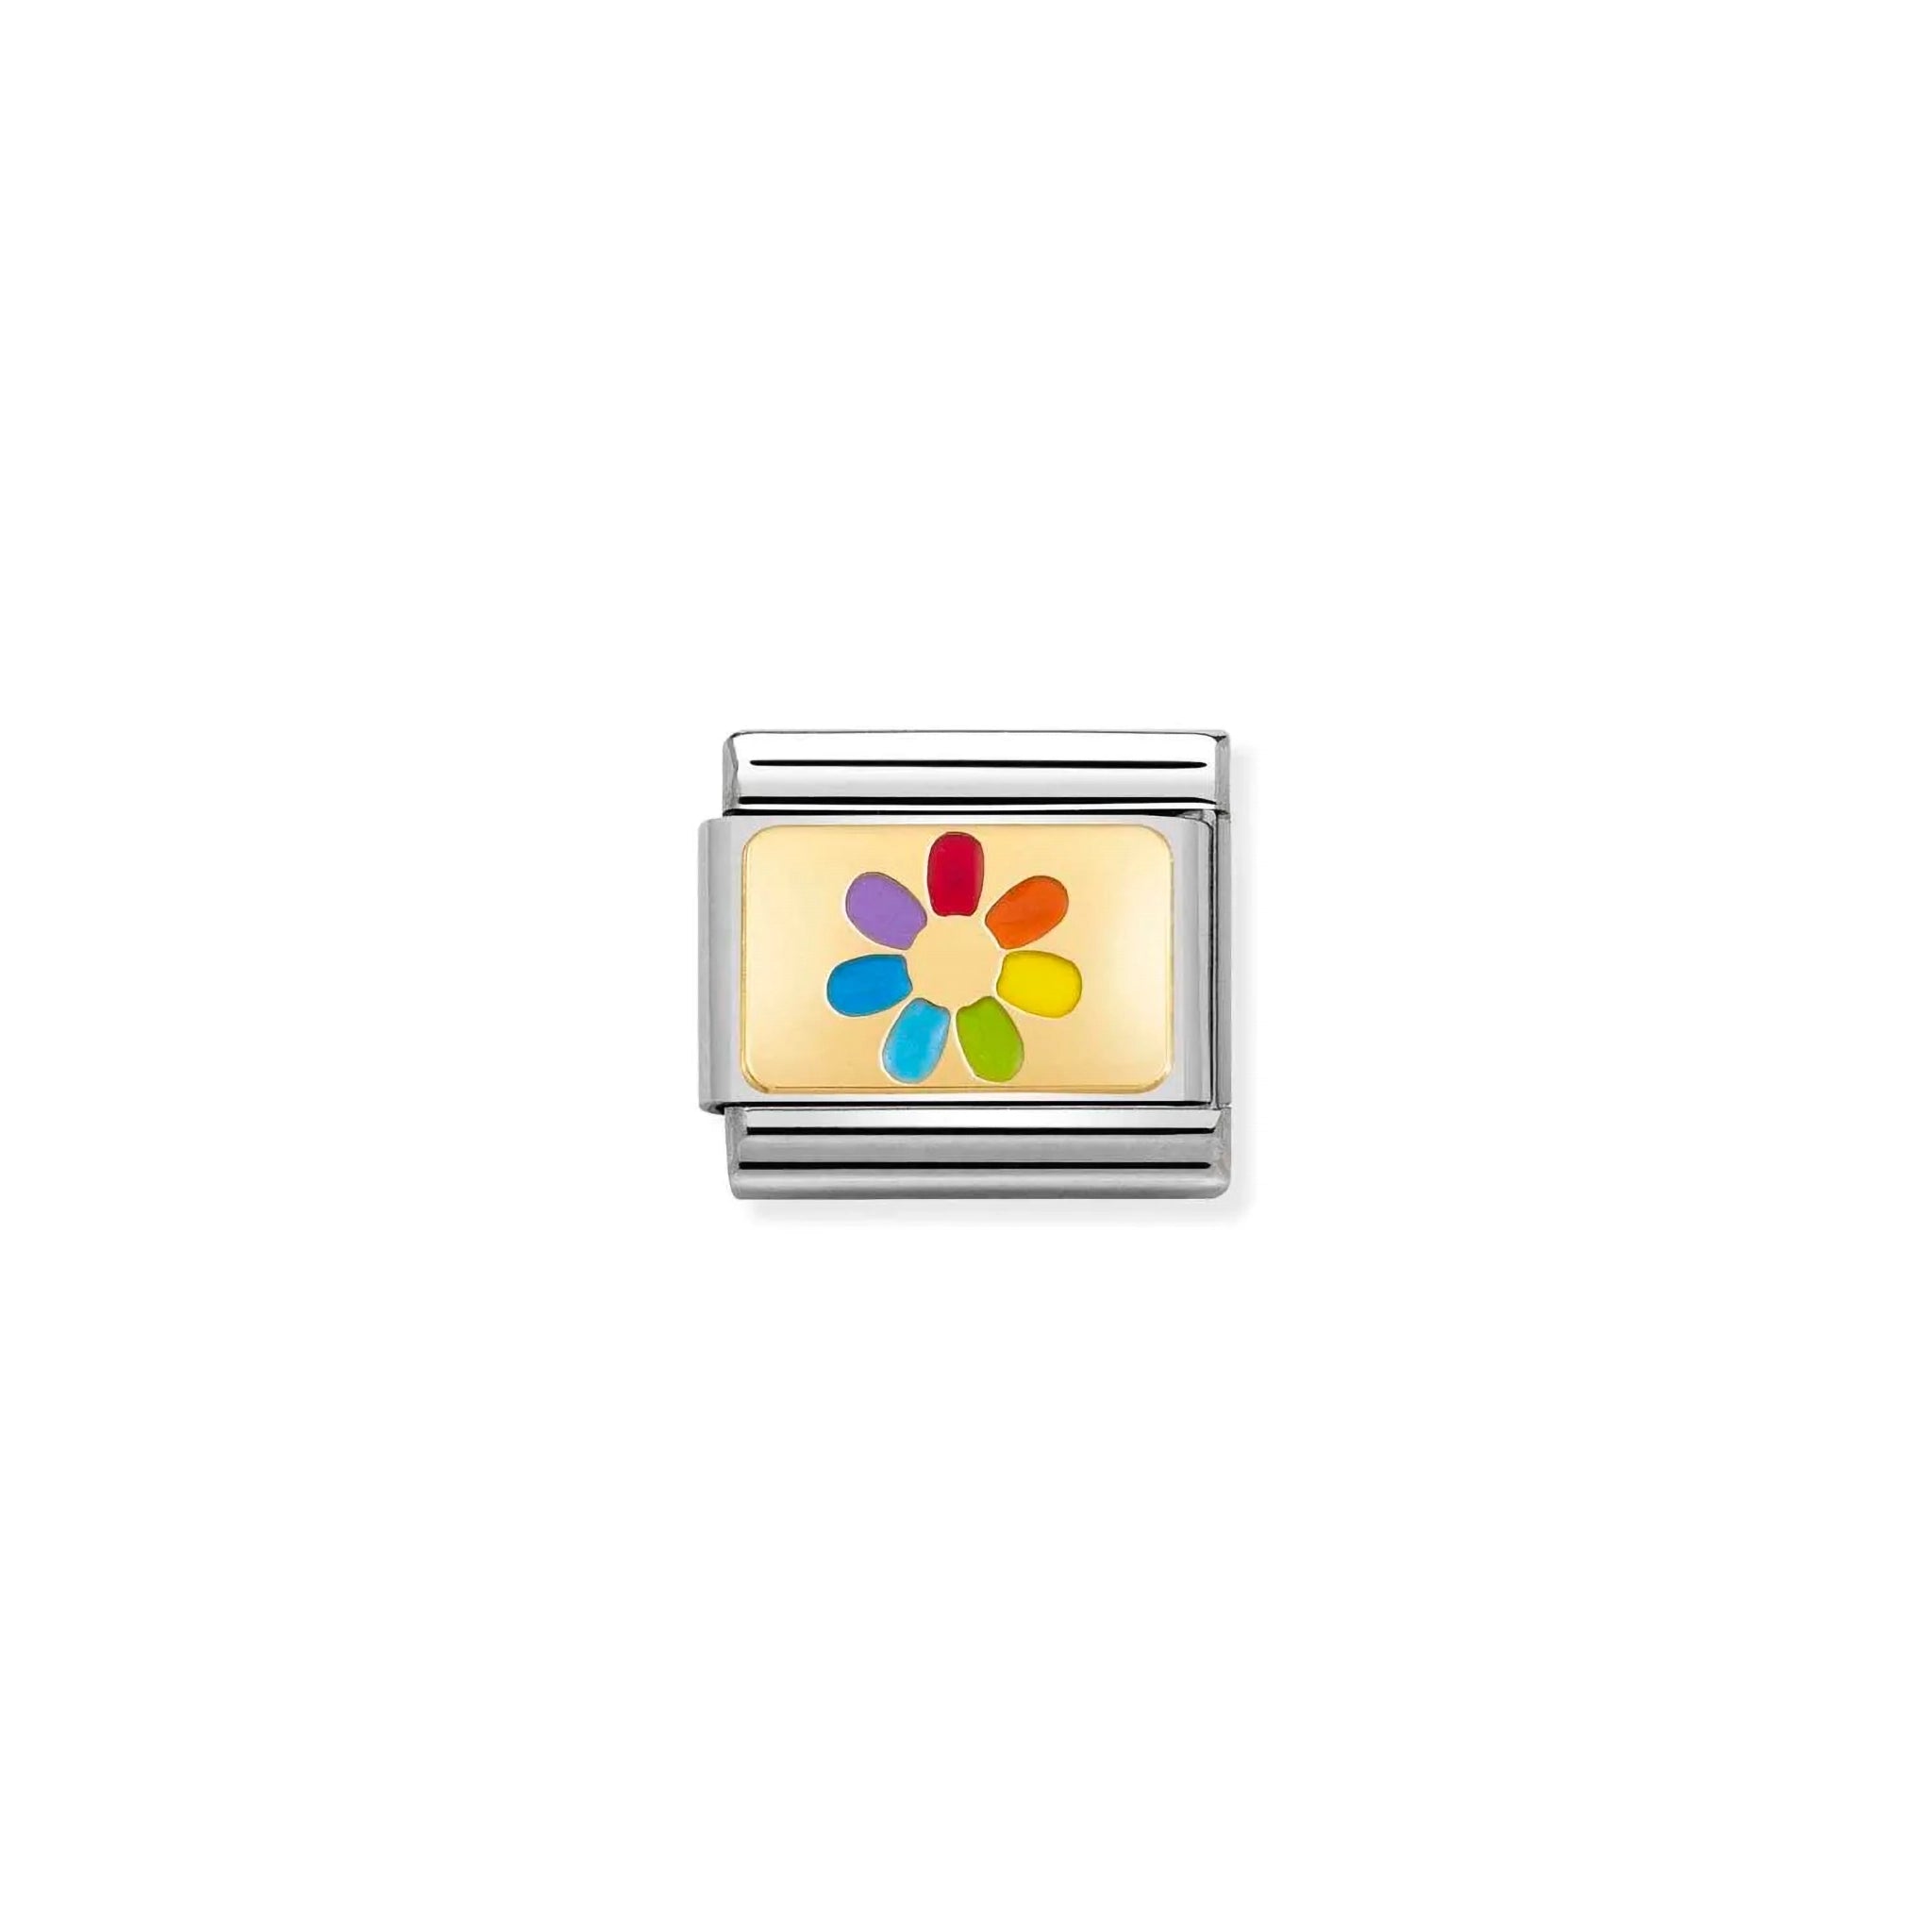 A Nomination charm link featuring a gold plaque with a rainbow enamel flower design